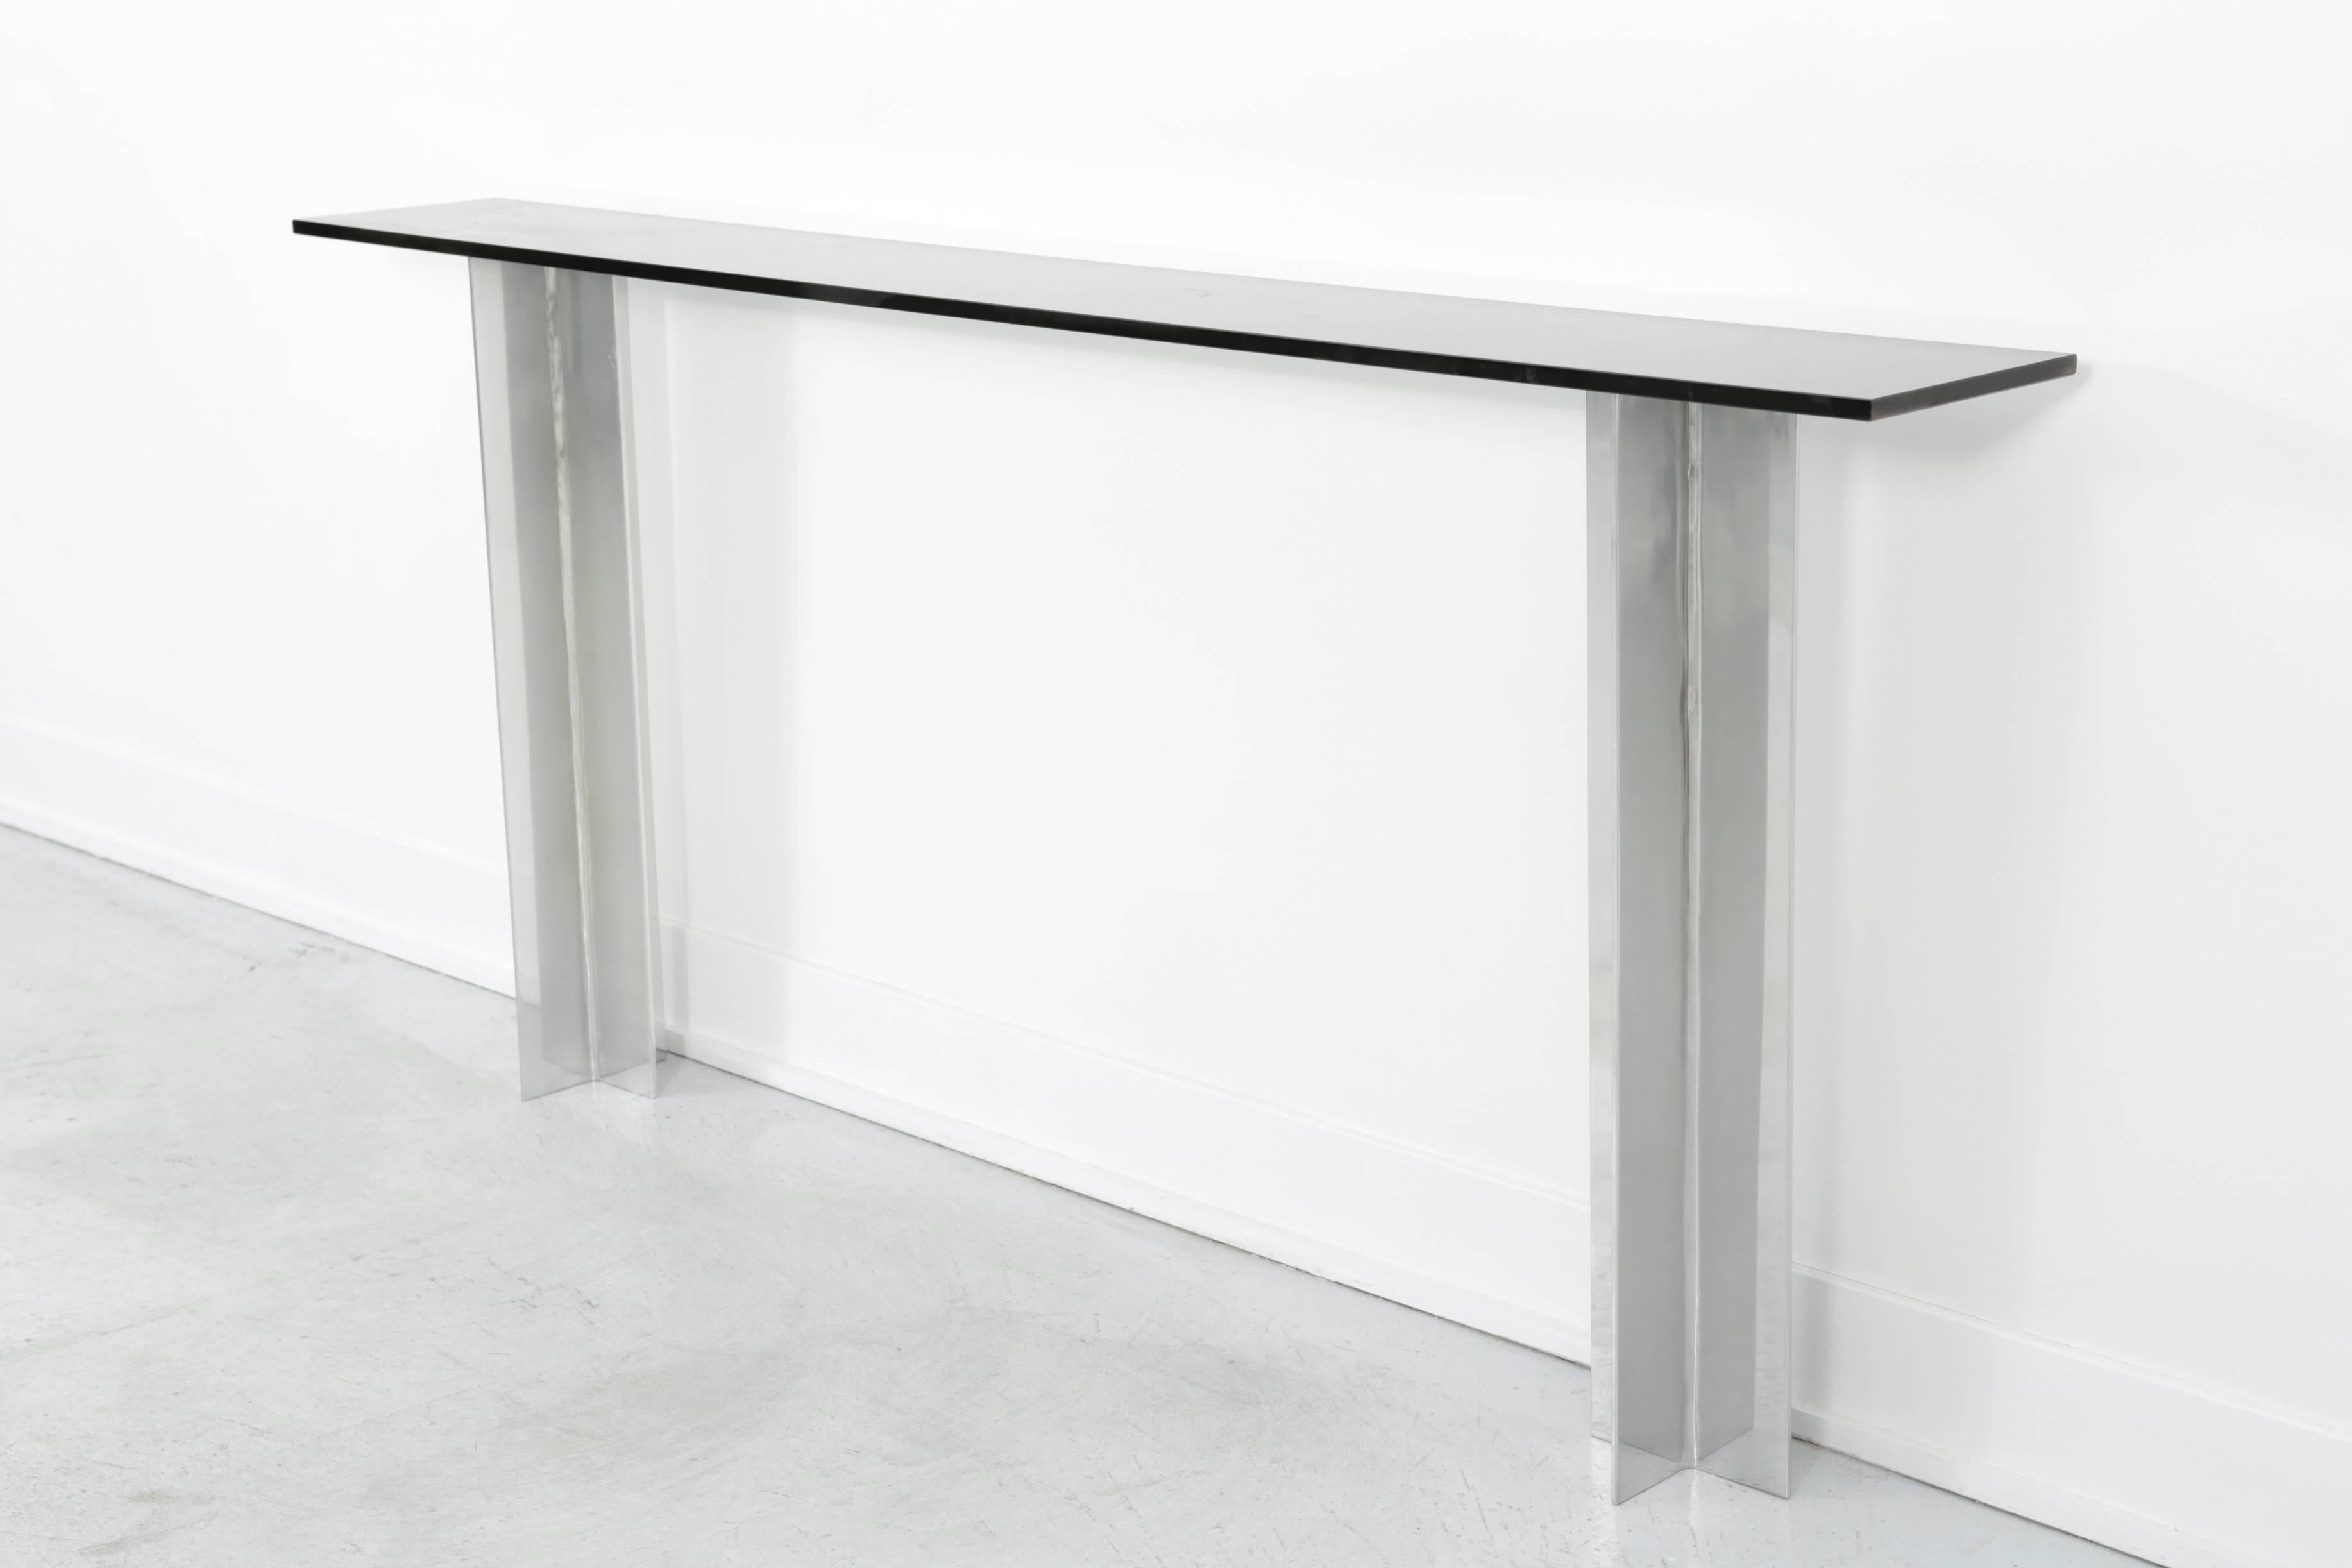 American Smoked Glass and Aluminium Console Table Attributed to Pace Manufacturing